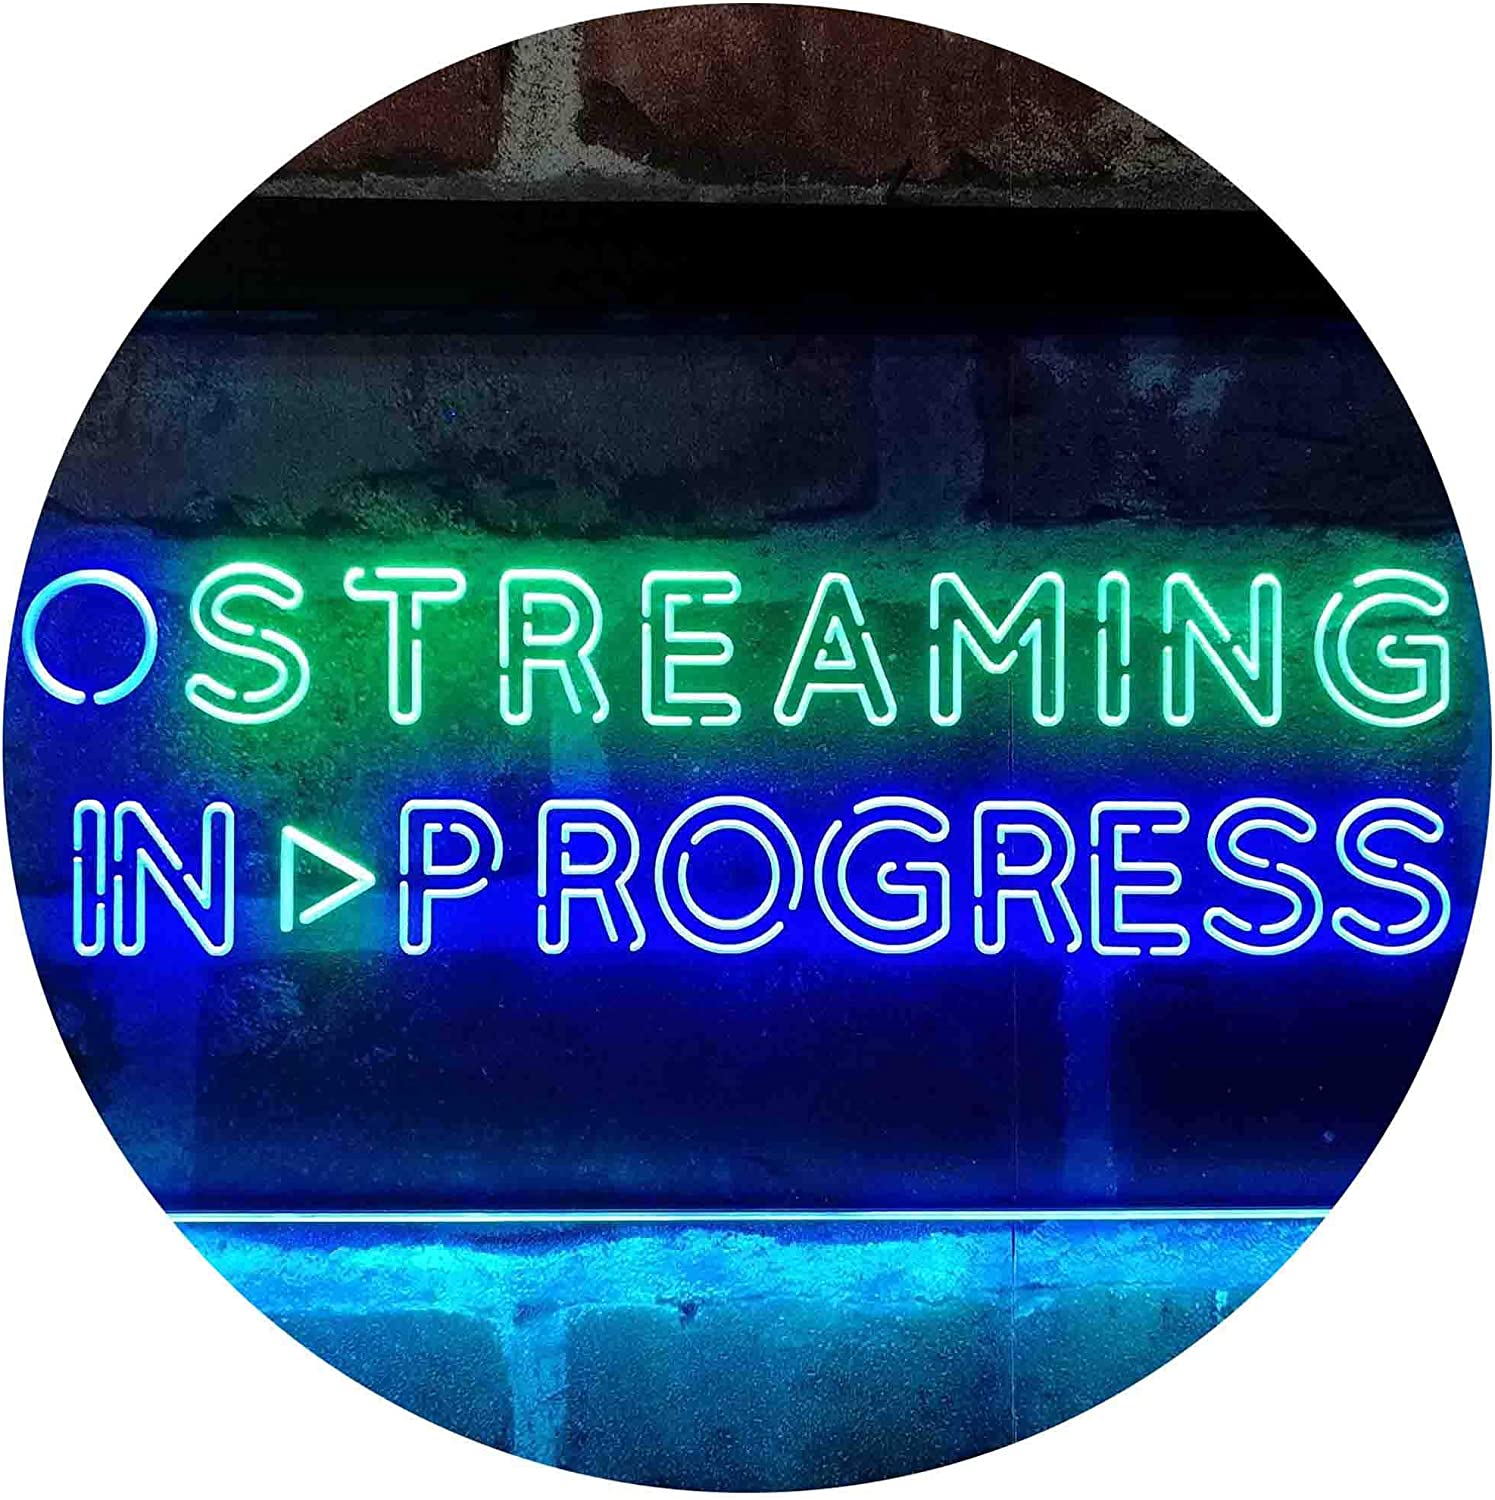 Streaming in Progress Display LED Neon Light Sign - Way Up Gifts